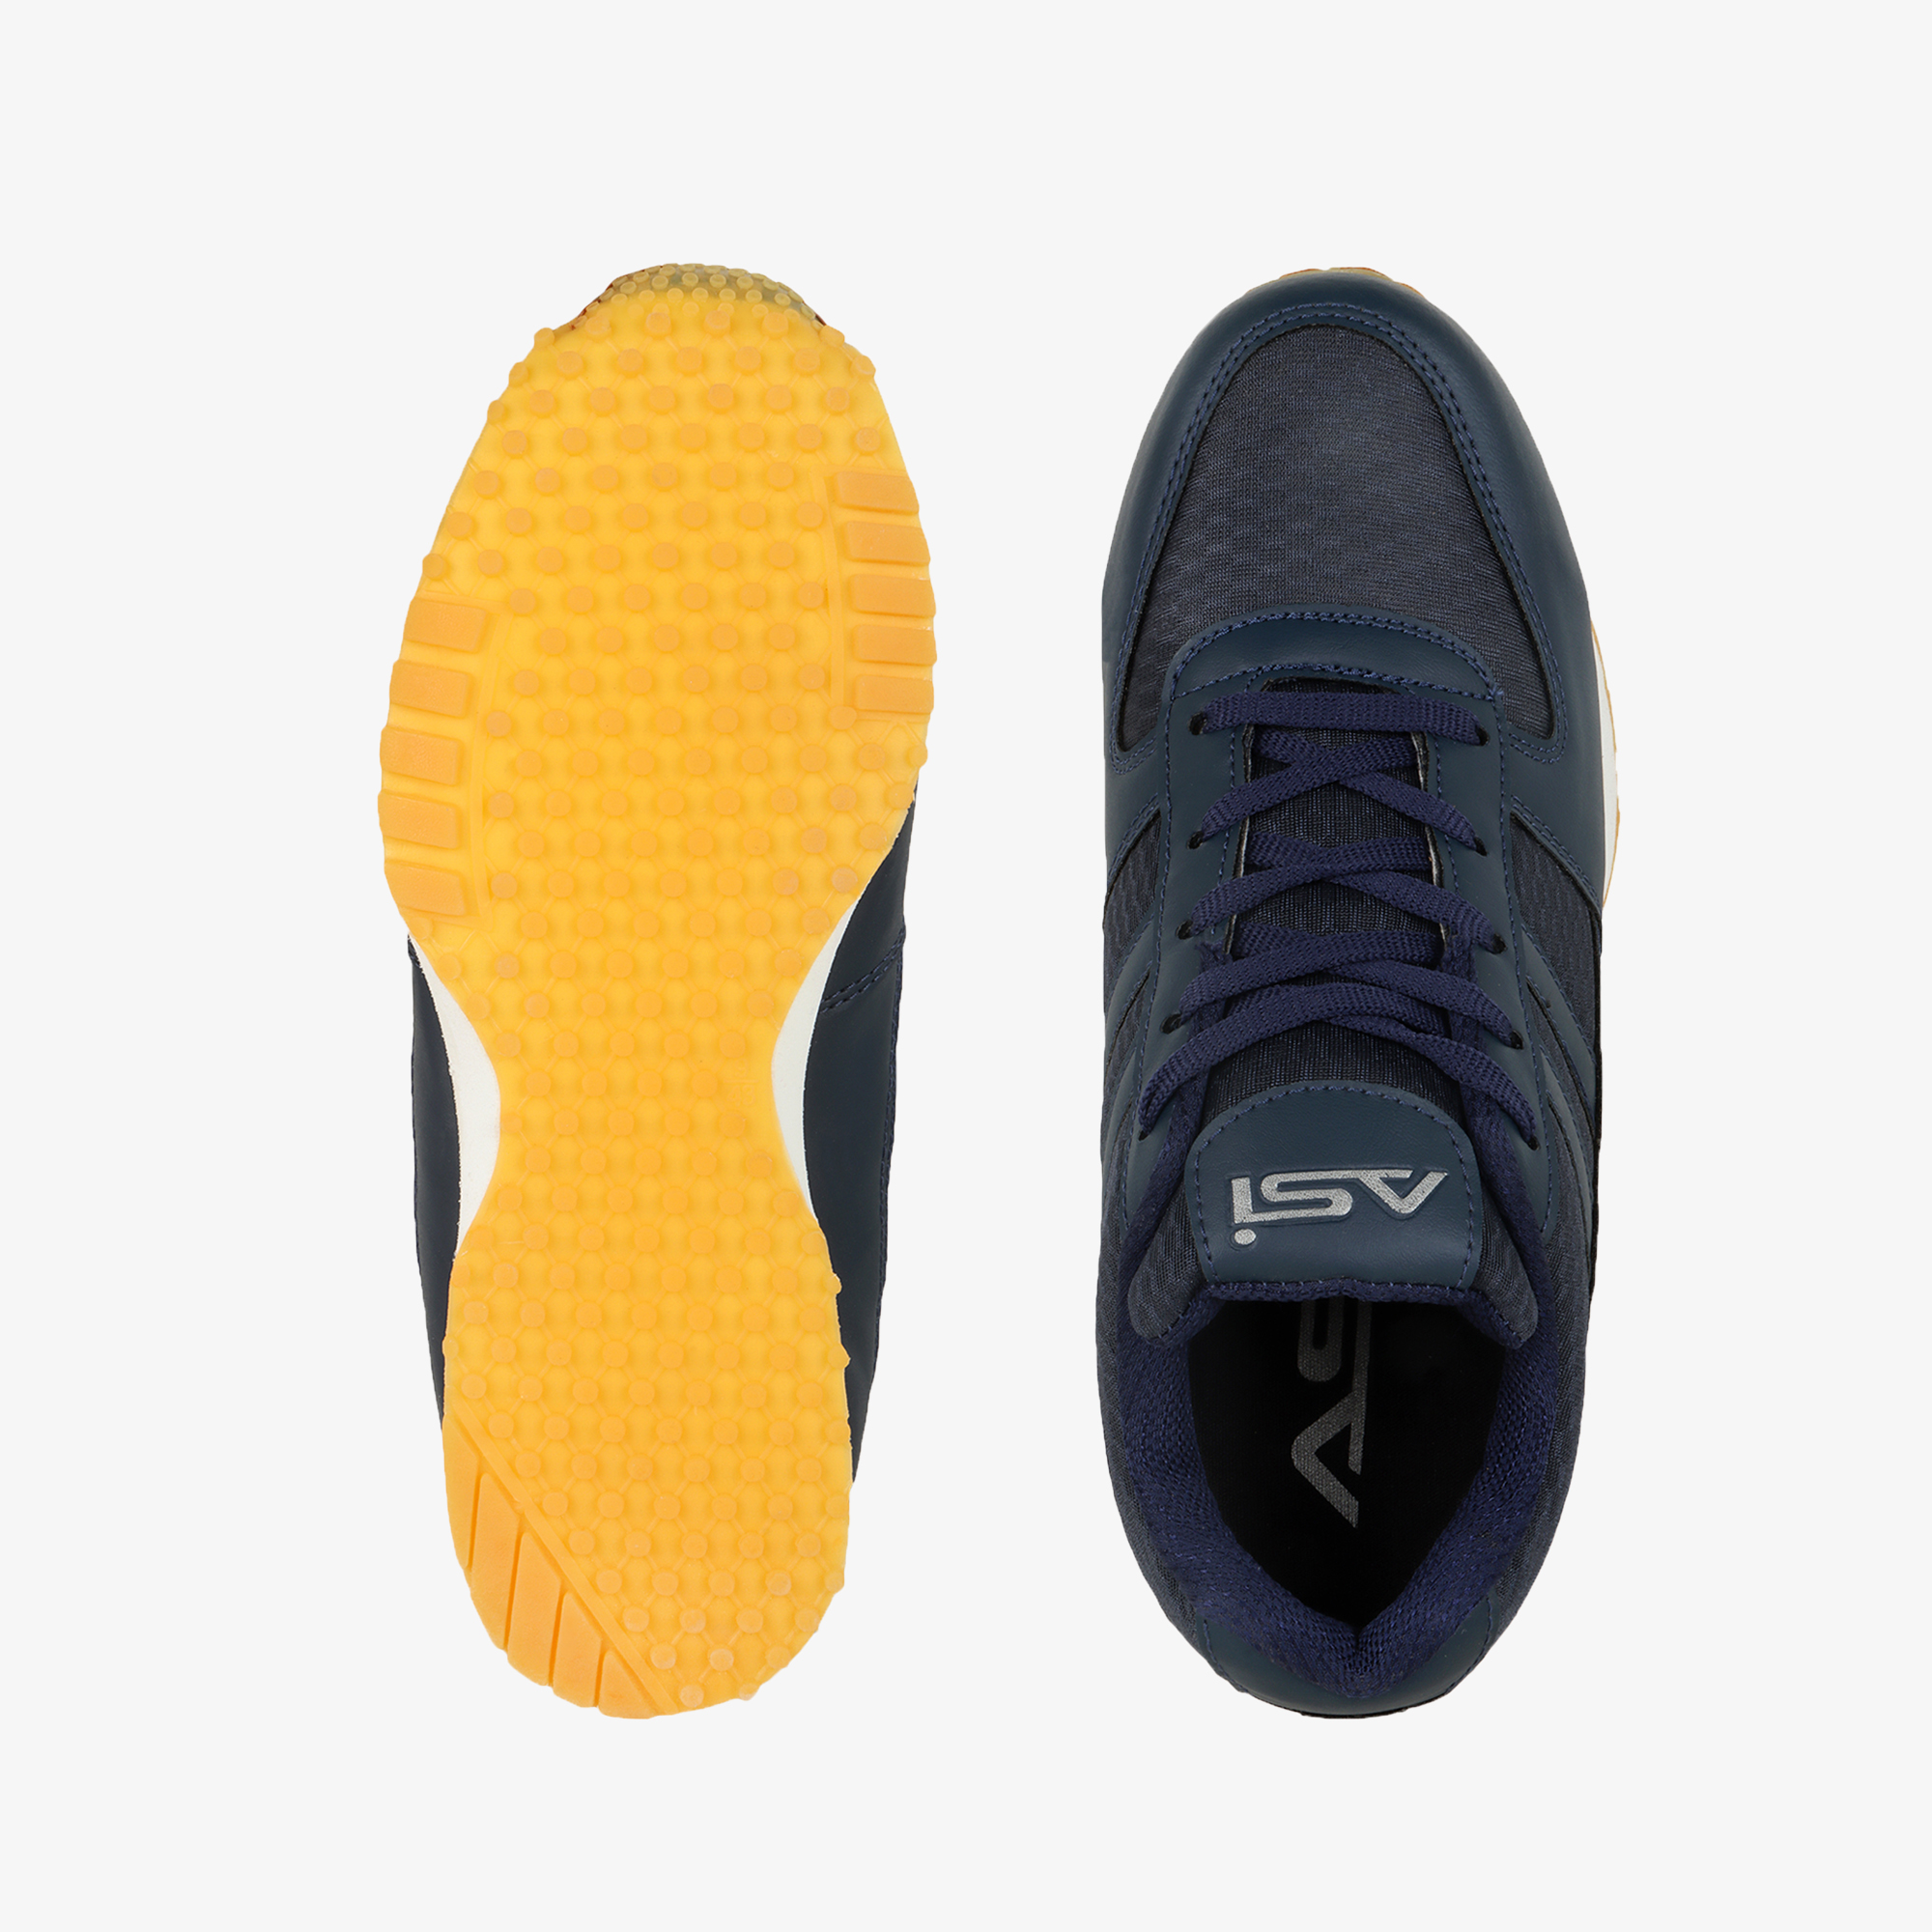 ASI Marathon Sports Shoes Navy blue Color | Lightweight & Extra Durable